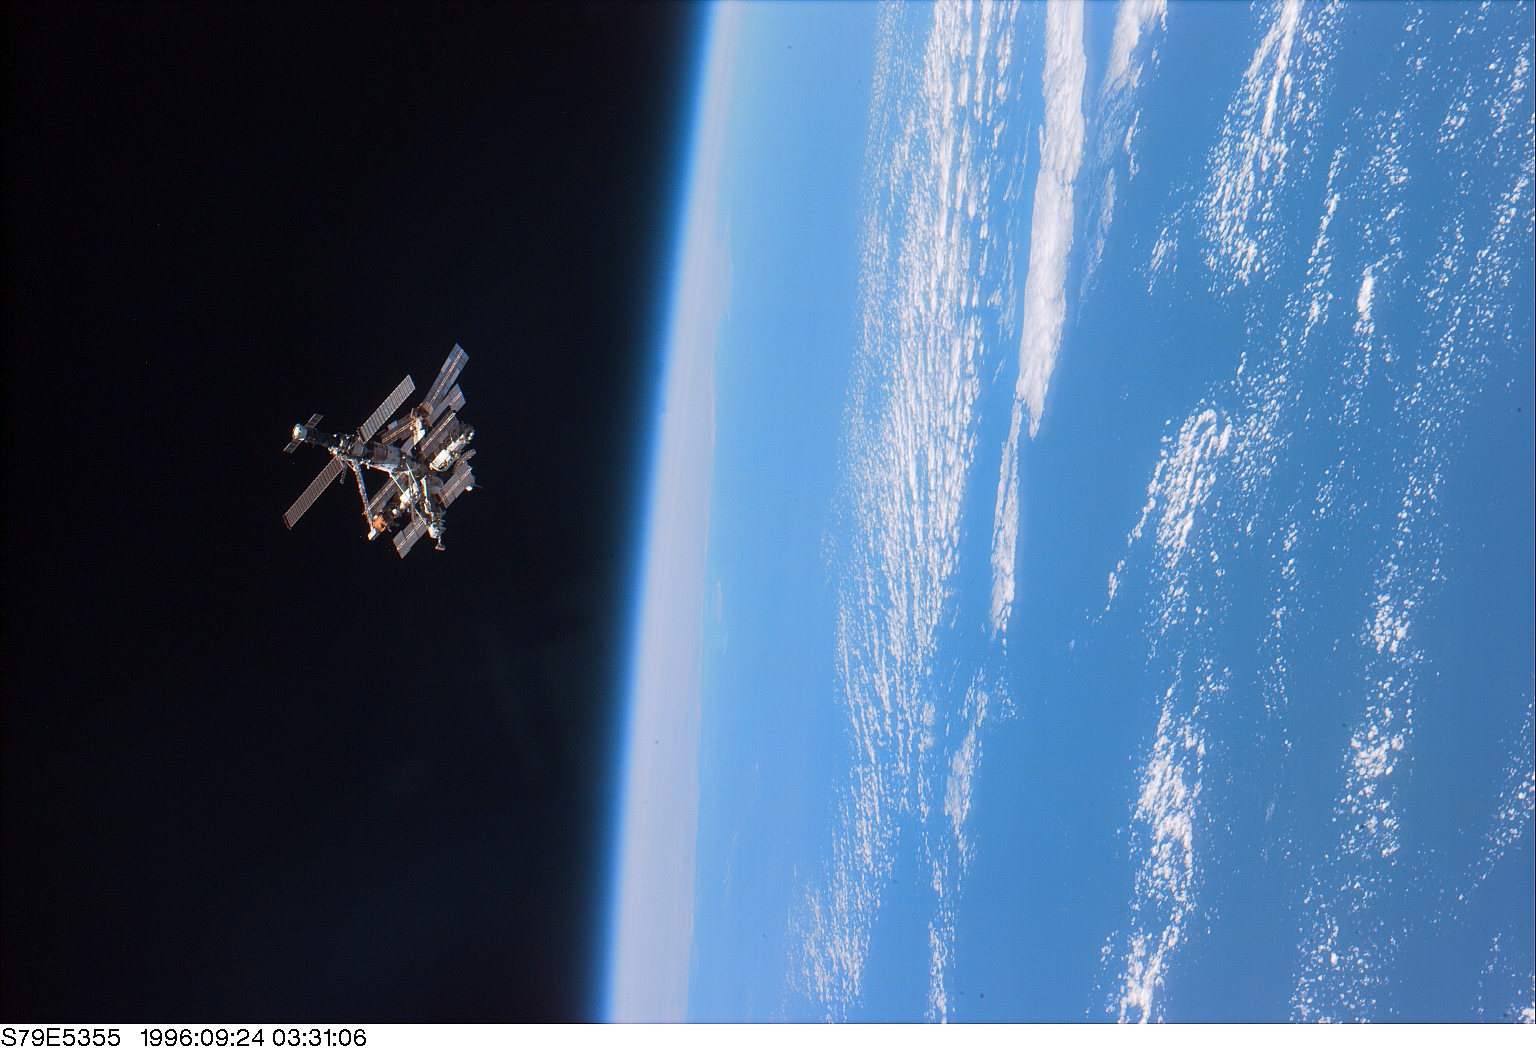 For the first time on STS-79, a shuttle crew saw Mir in its complete configuration, with six research and habitation modules. This would form John Blaha's home for four months from September 1996 through January 1997. Photo Credit: NASA